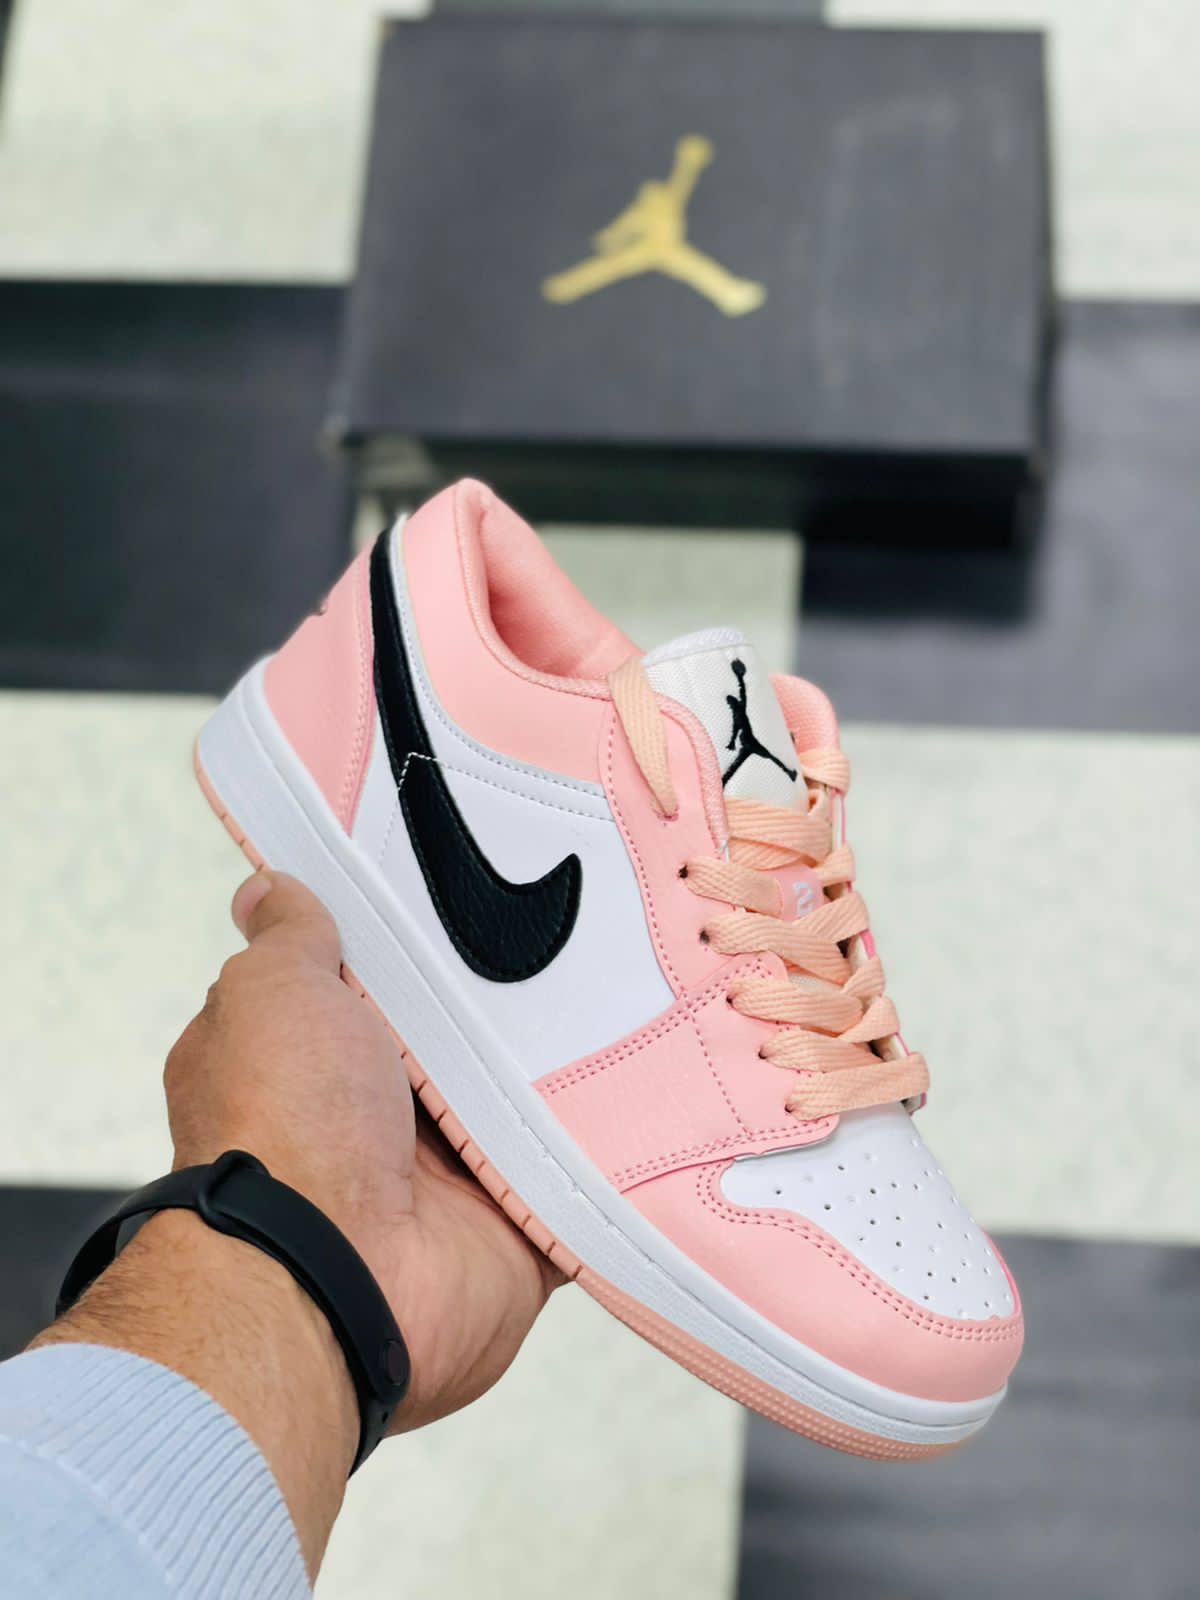 Low Arctic Pink Sneaker For Girls In Stock